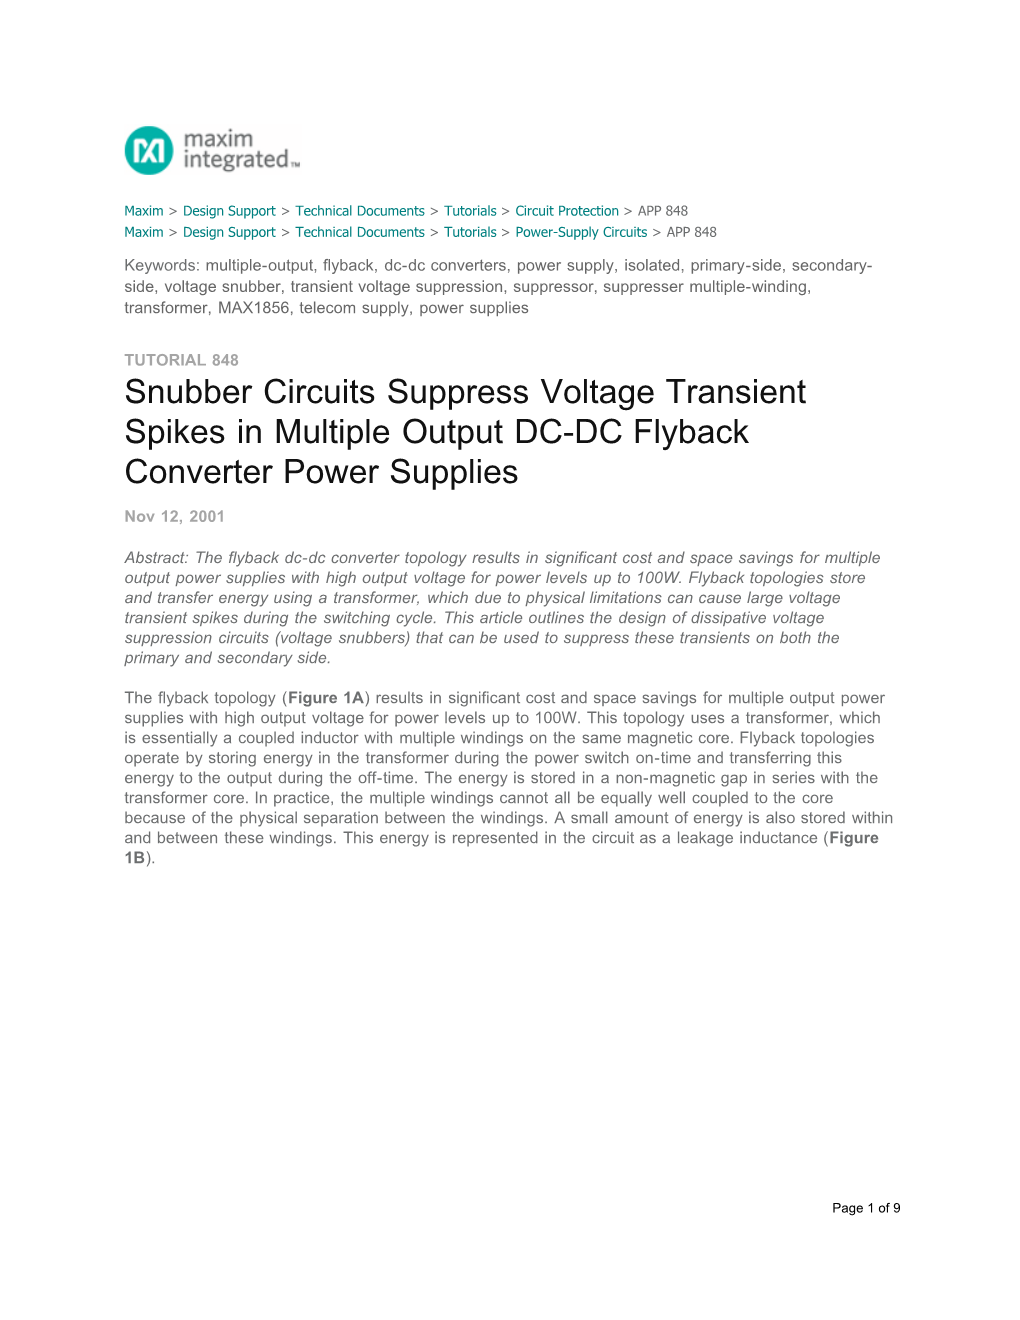 Snubber Circuits Suppress Voltage Transient Spikes in Multiple Output DC-DC Flyback Converter Power Supplies